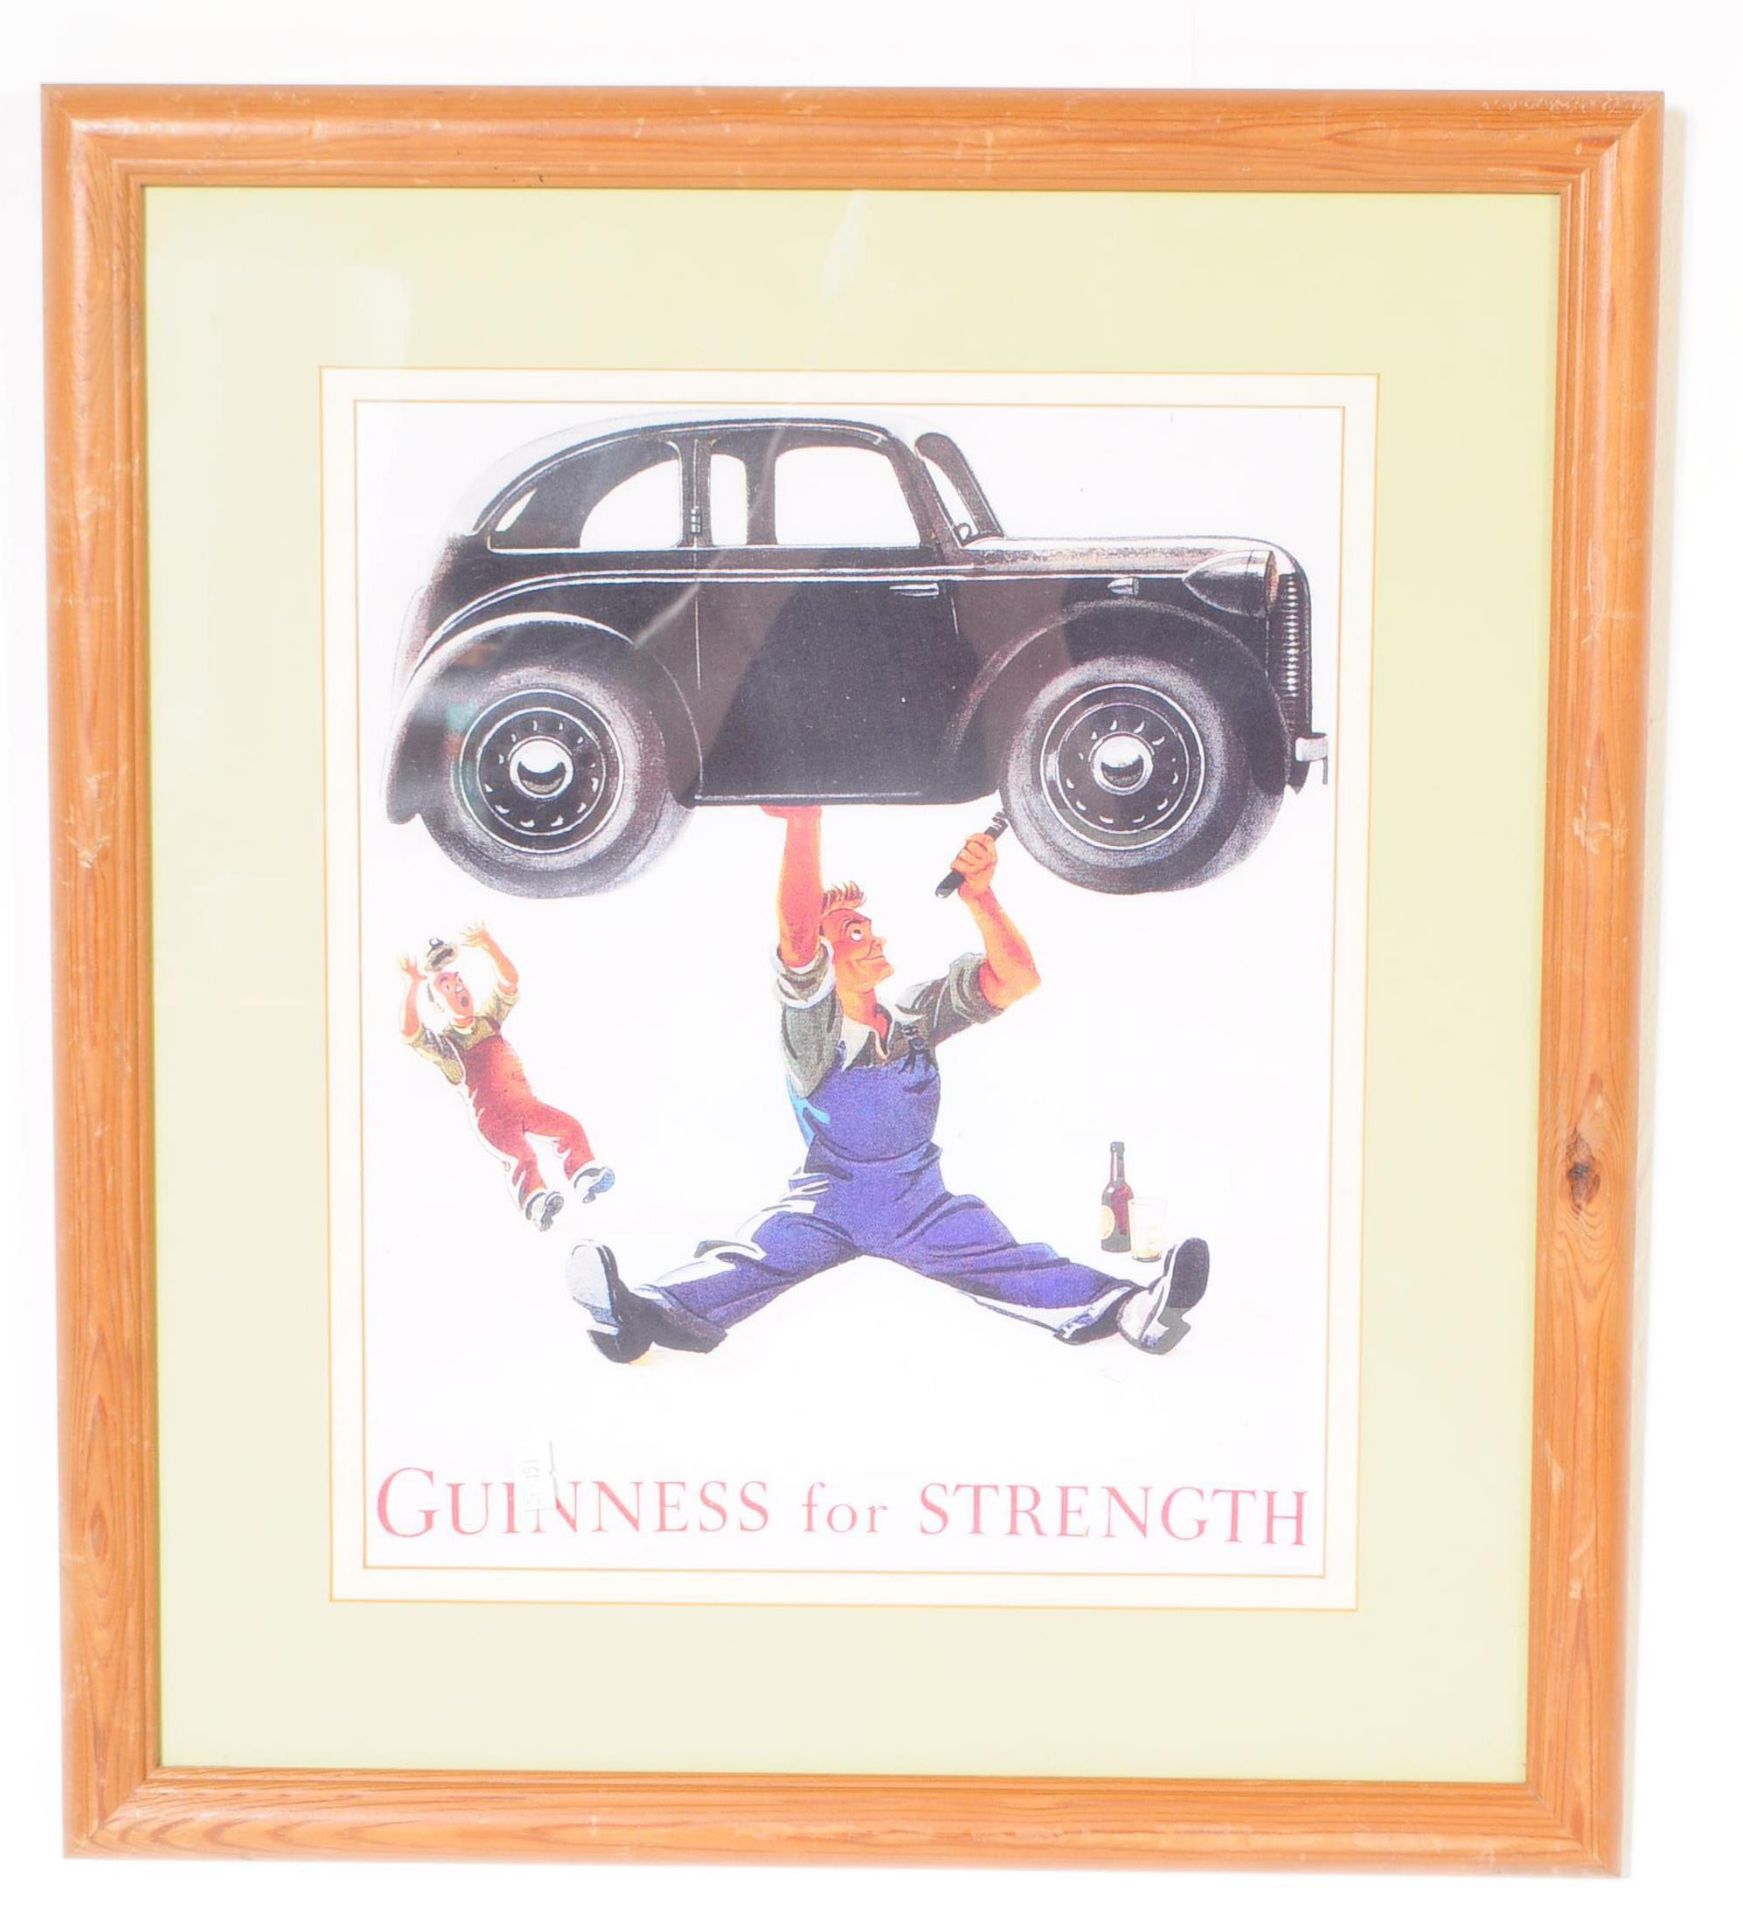 GUINNESS - COLLECTION OF REPRODUCTION ADVERTISING PRINTS - Image 3 of 5